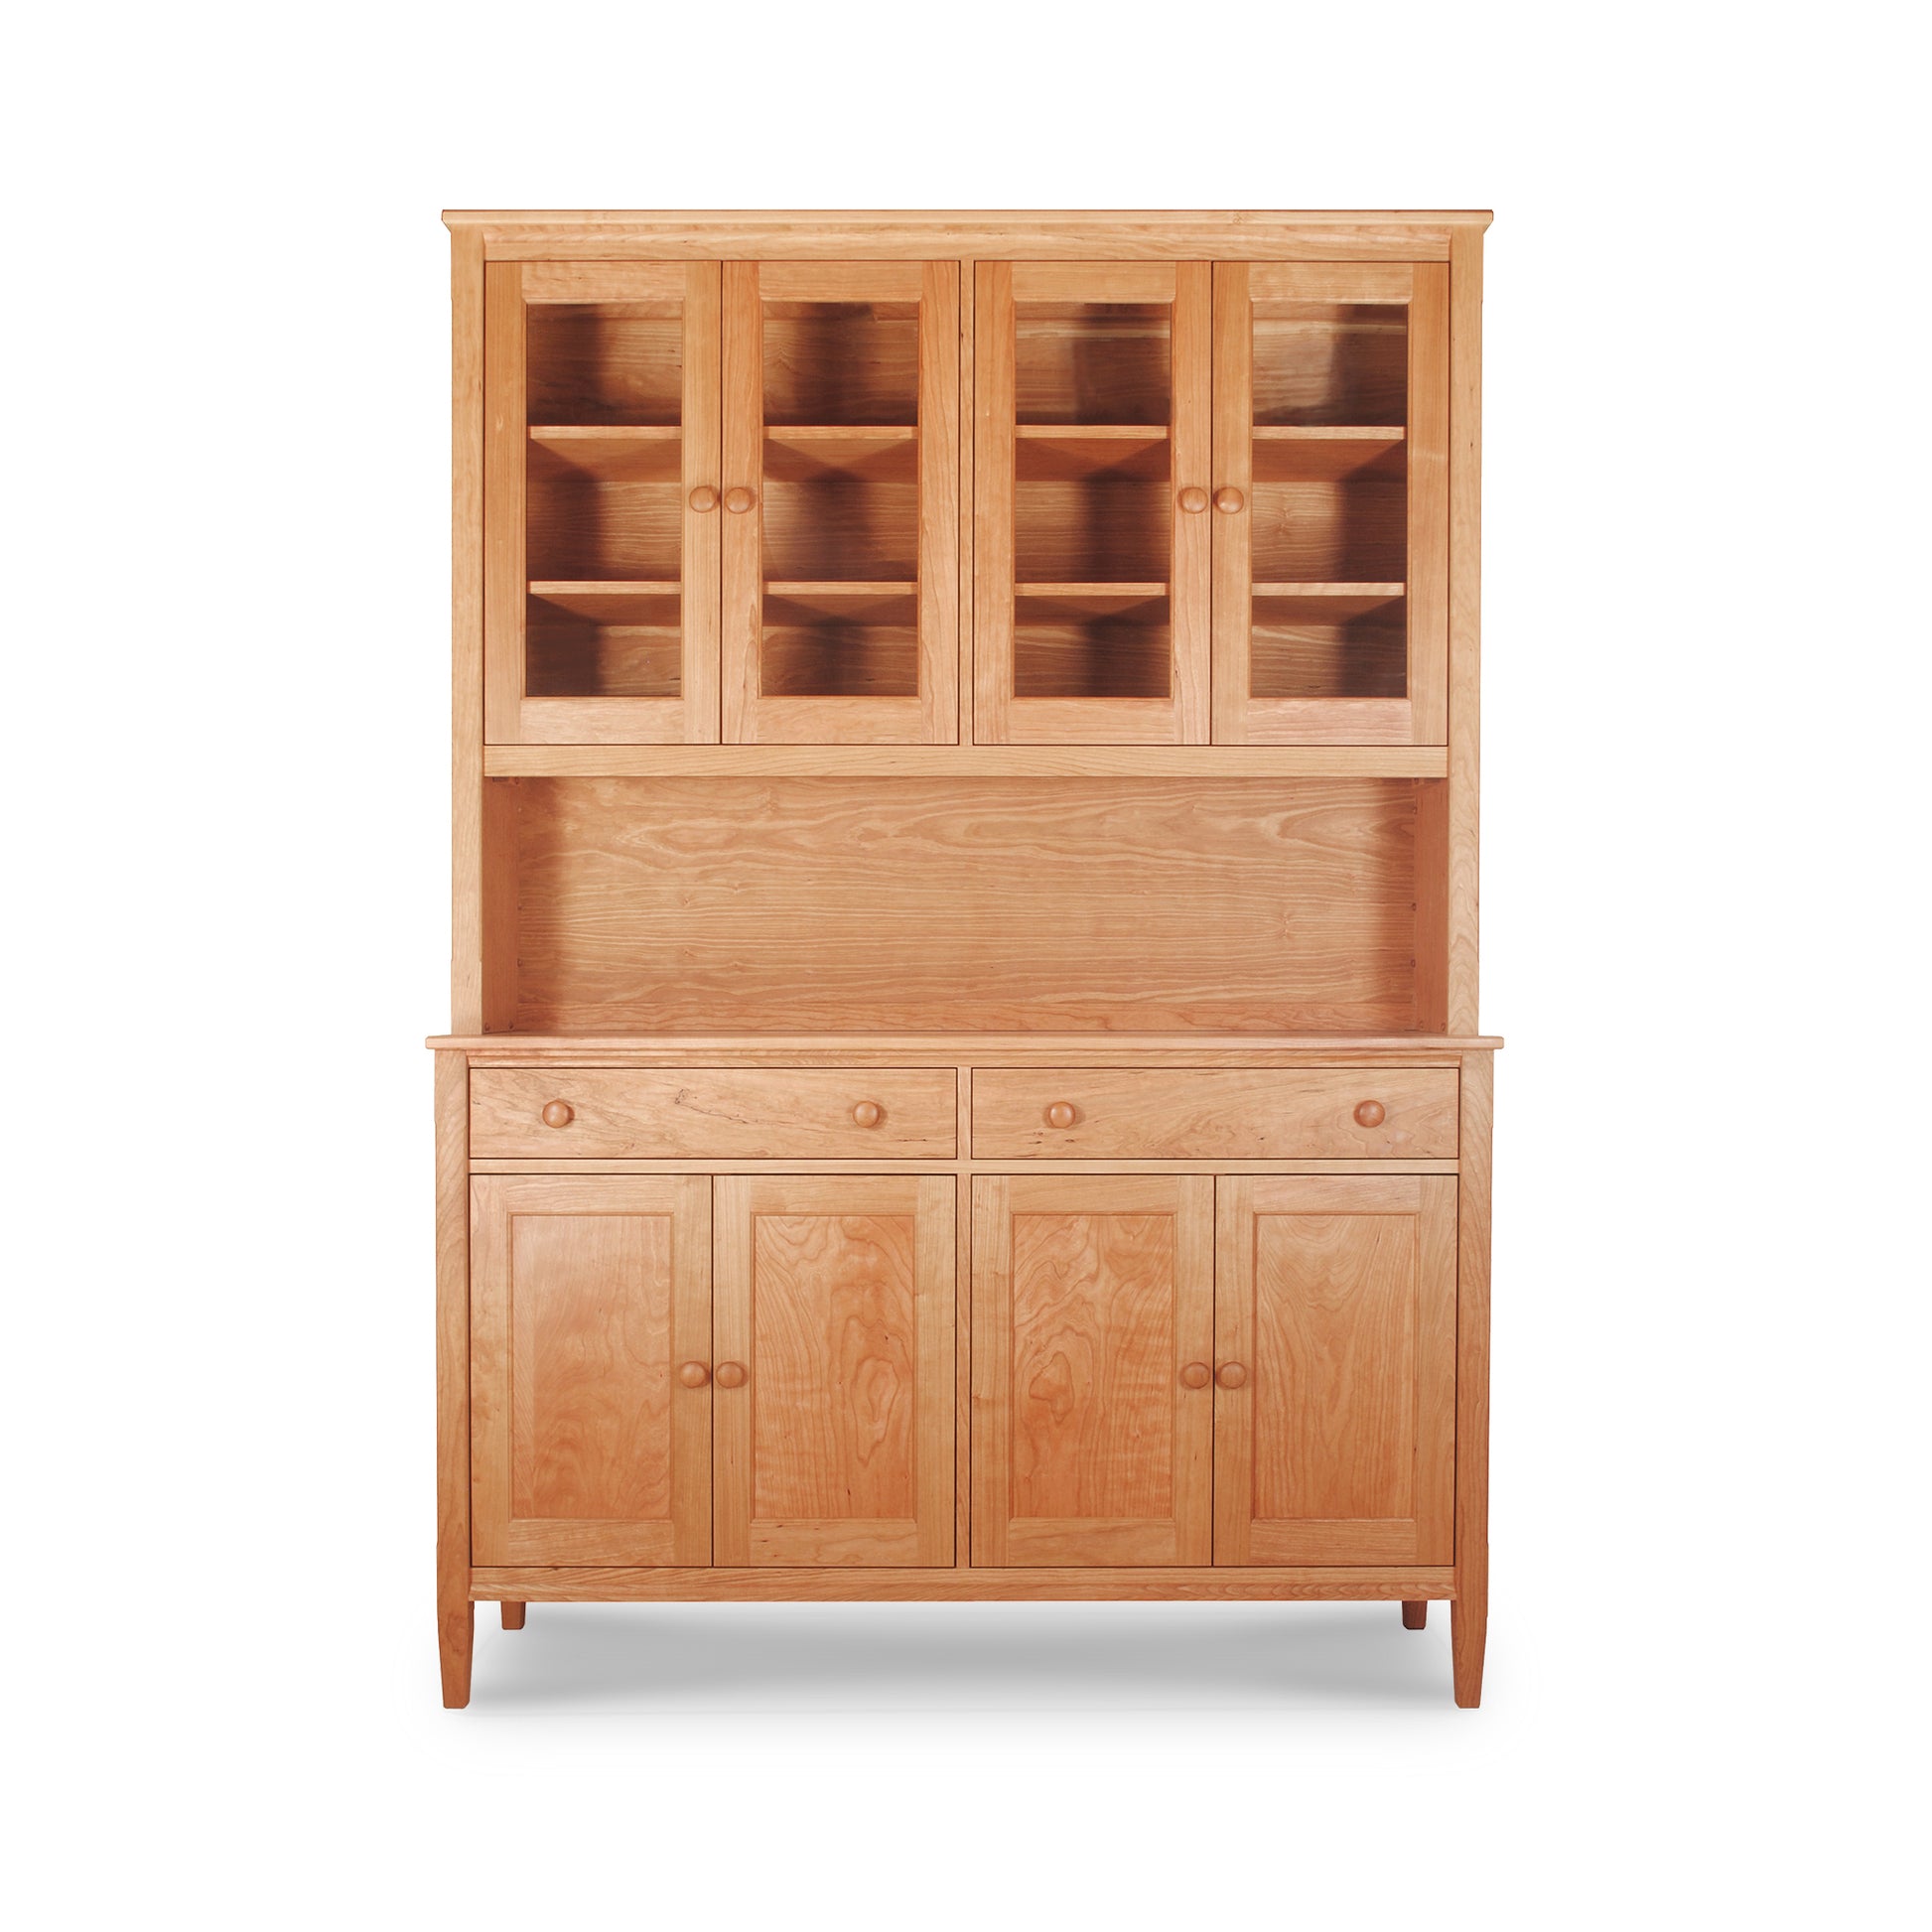 A Maple Corner Woodworks Vermont Shaker Large China Cabinet with an upper display cabinet featuring open shelving and a lower cabinet with closed doors, isolated on a white background.